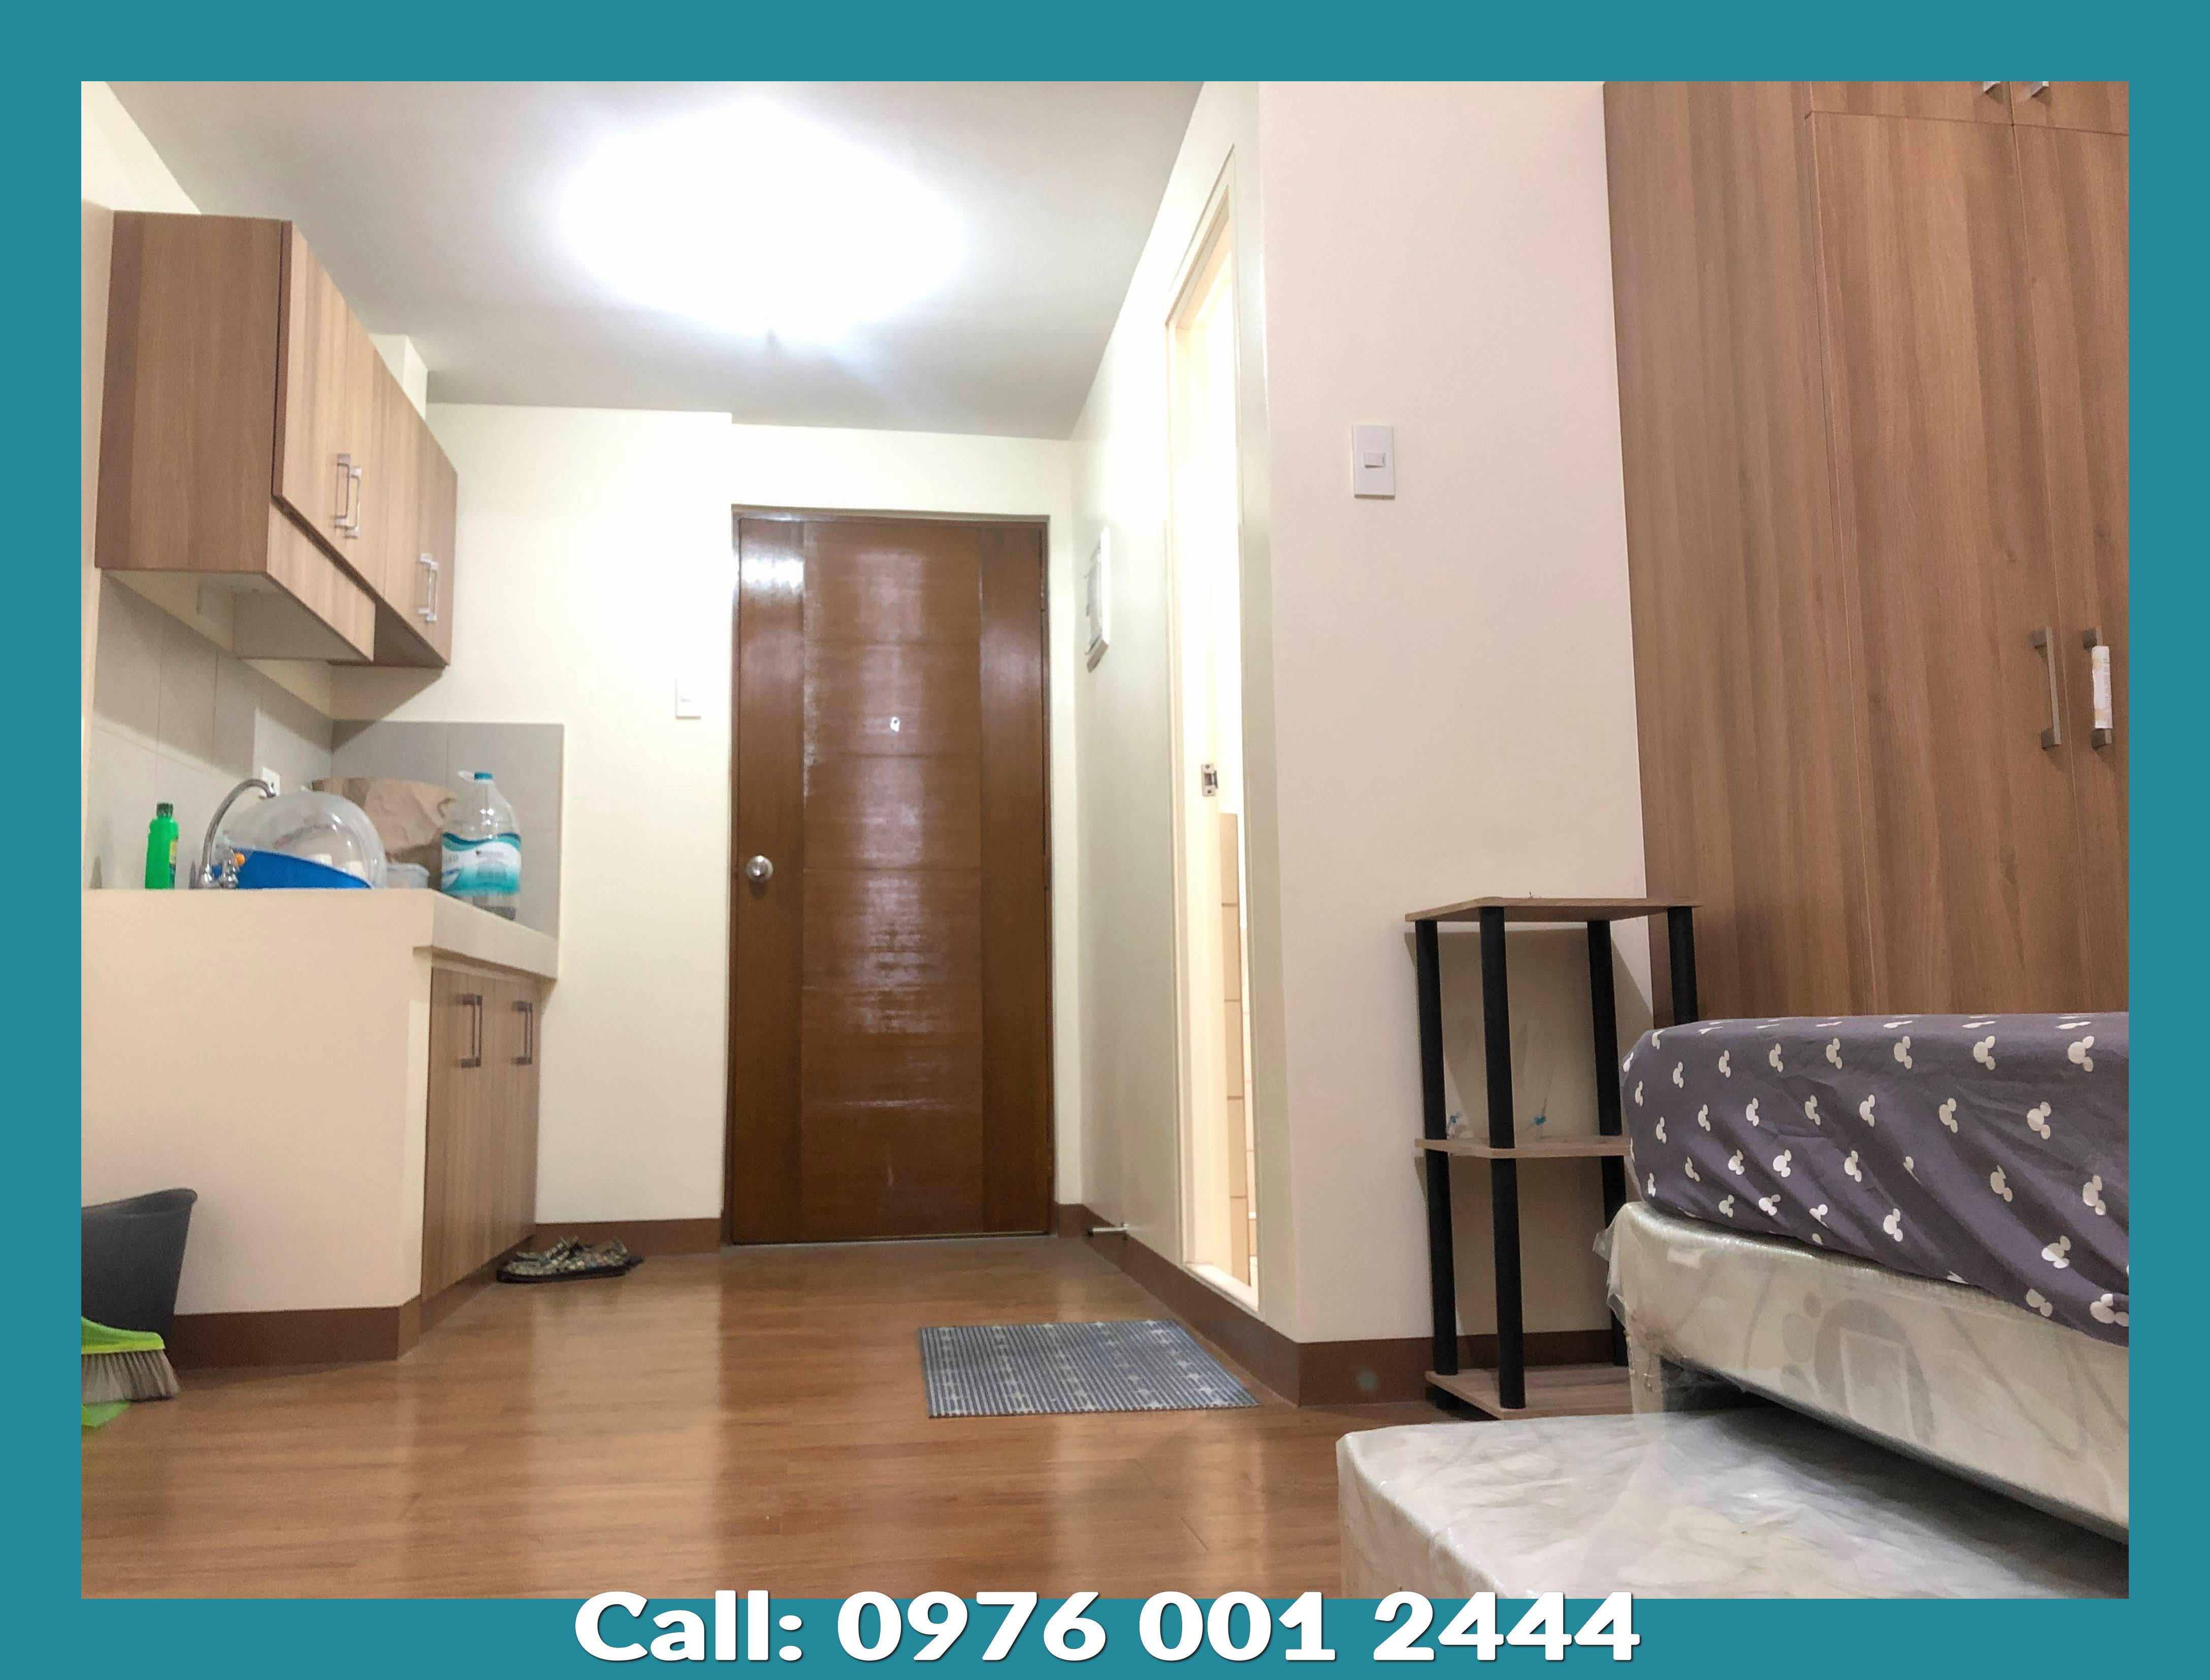 Cityland Pines Peak Tower 2, Affordable Studio unit with Aircon for rent Mandaluyong near Ortigas, Makati & BGC -Semi-furnished